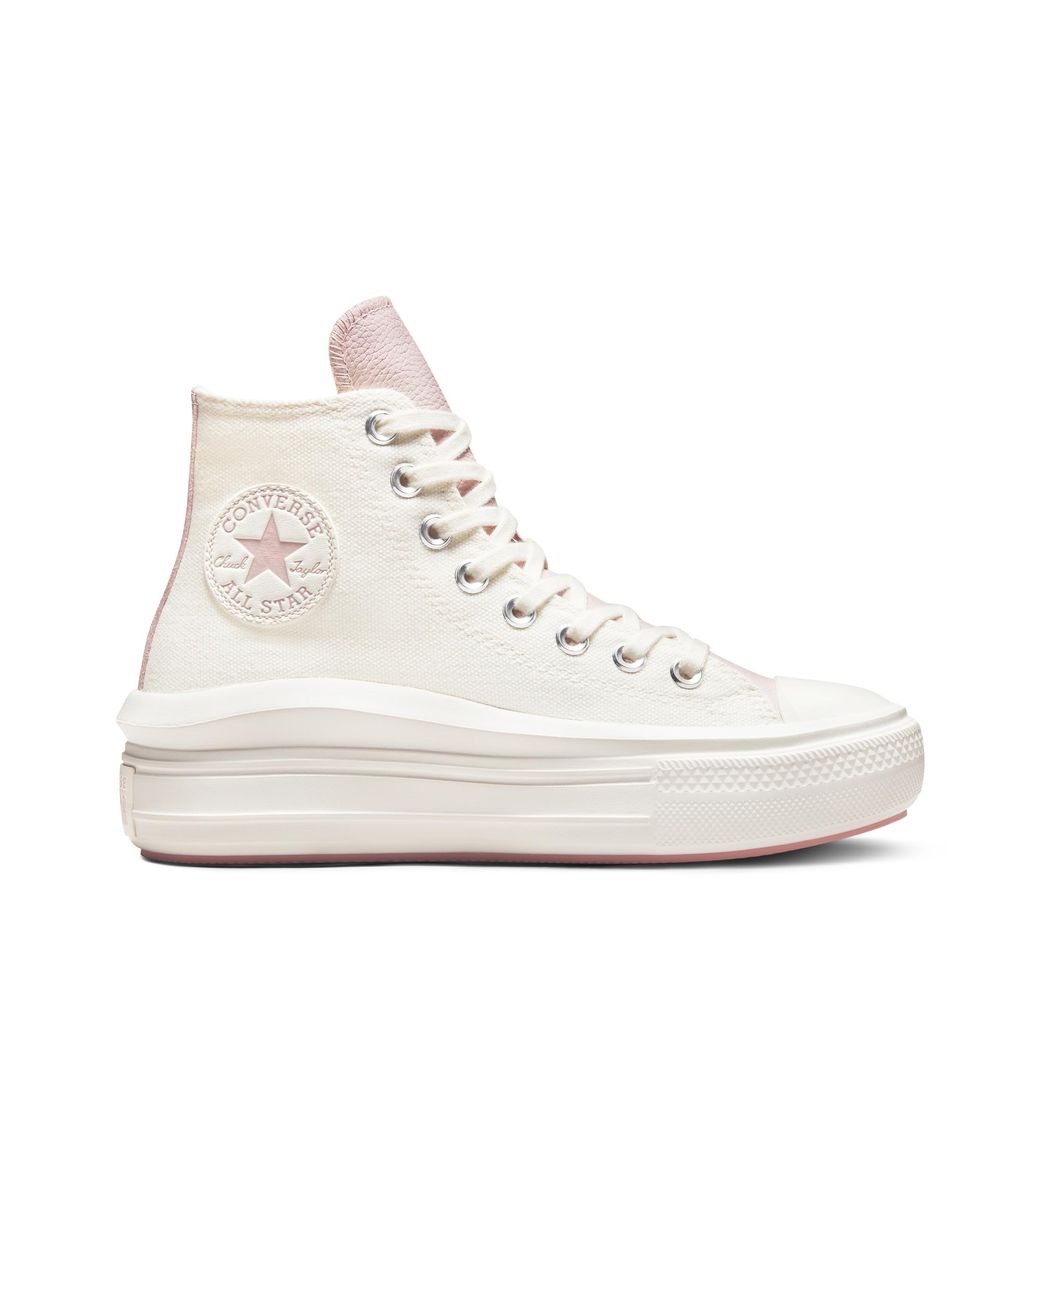 Converse Chuck Taylor All Star Move Platform Tonal Materials in White | Lyst